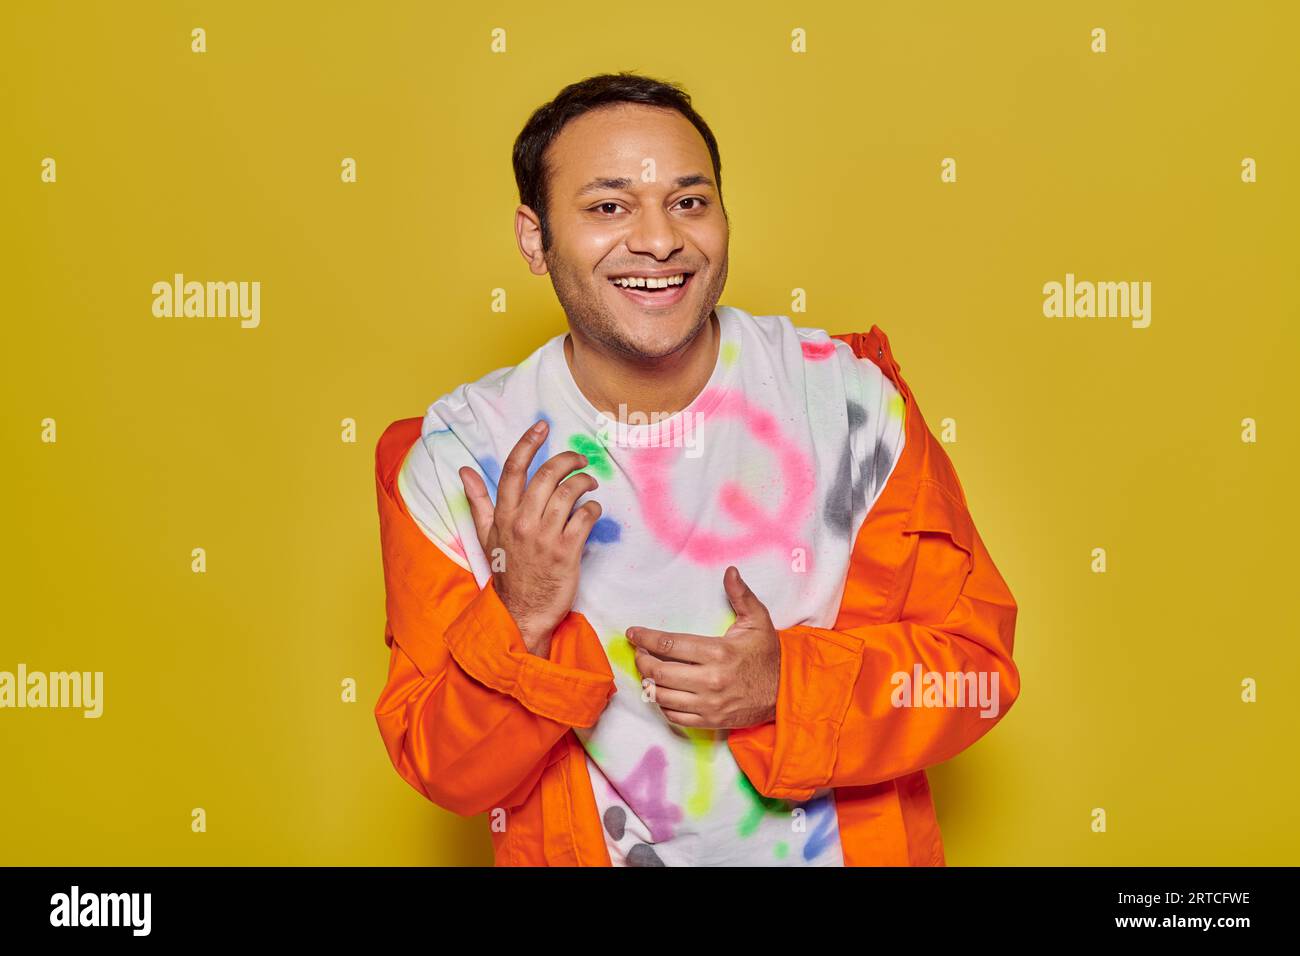 gleeful indian man in orange jacket and diy t-shirt smiling and looking at camera on yellow backdrop Stock Photo